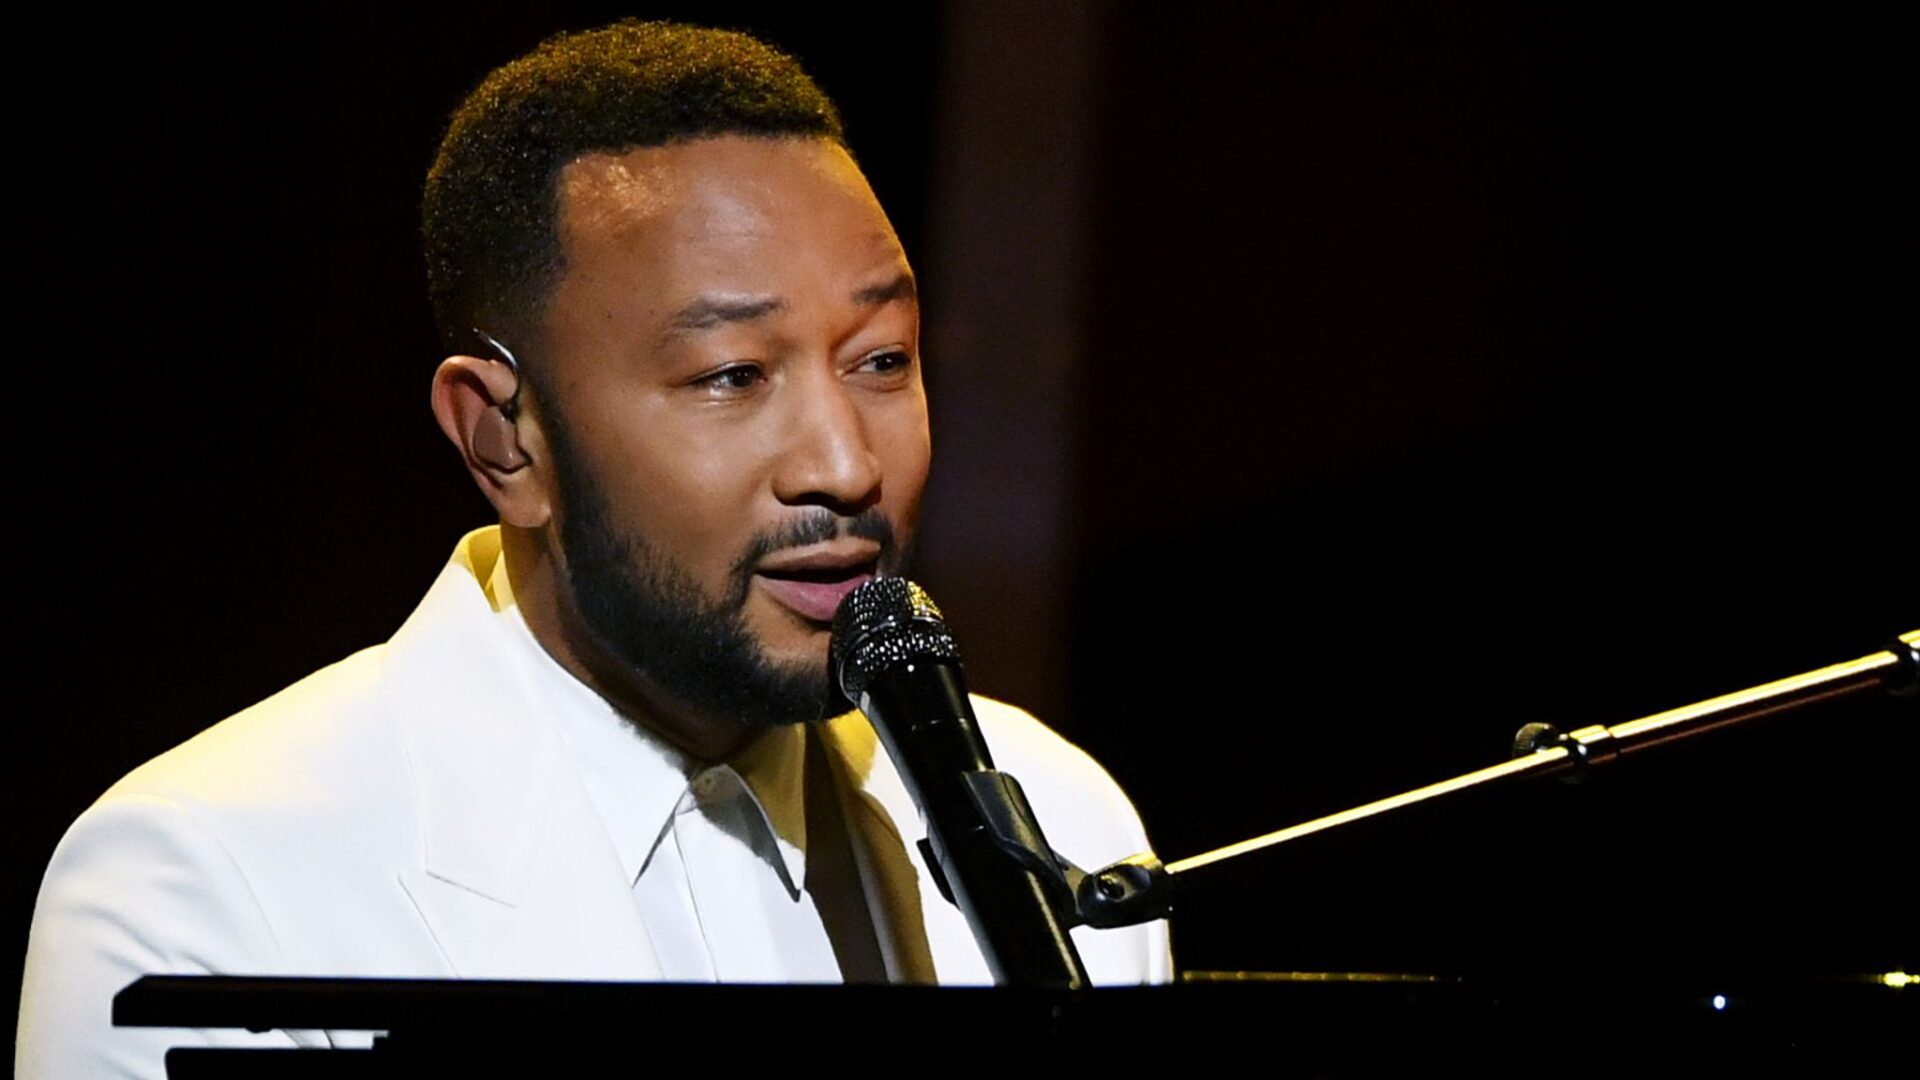 John Legend Announces Ticket Details For His One-Off Royal Albert Hall Show, Yours Truly, News, October 3, 2023